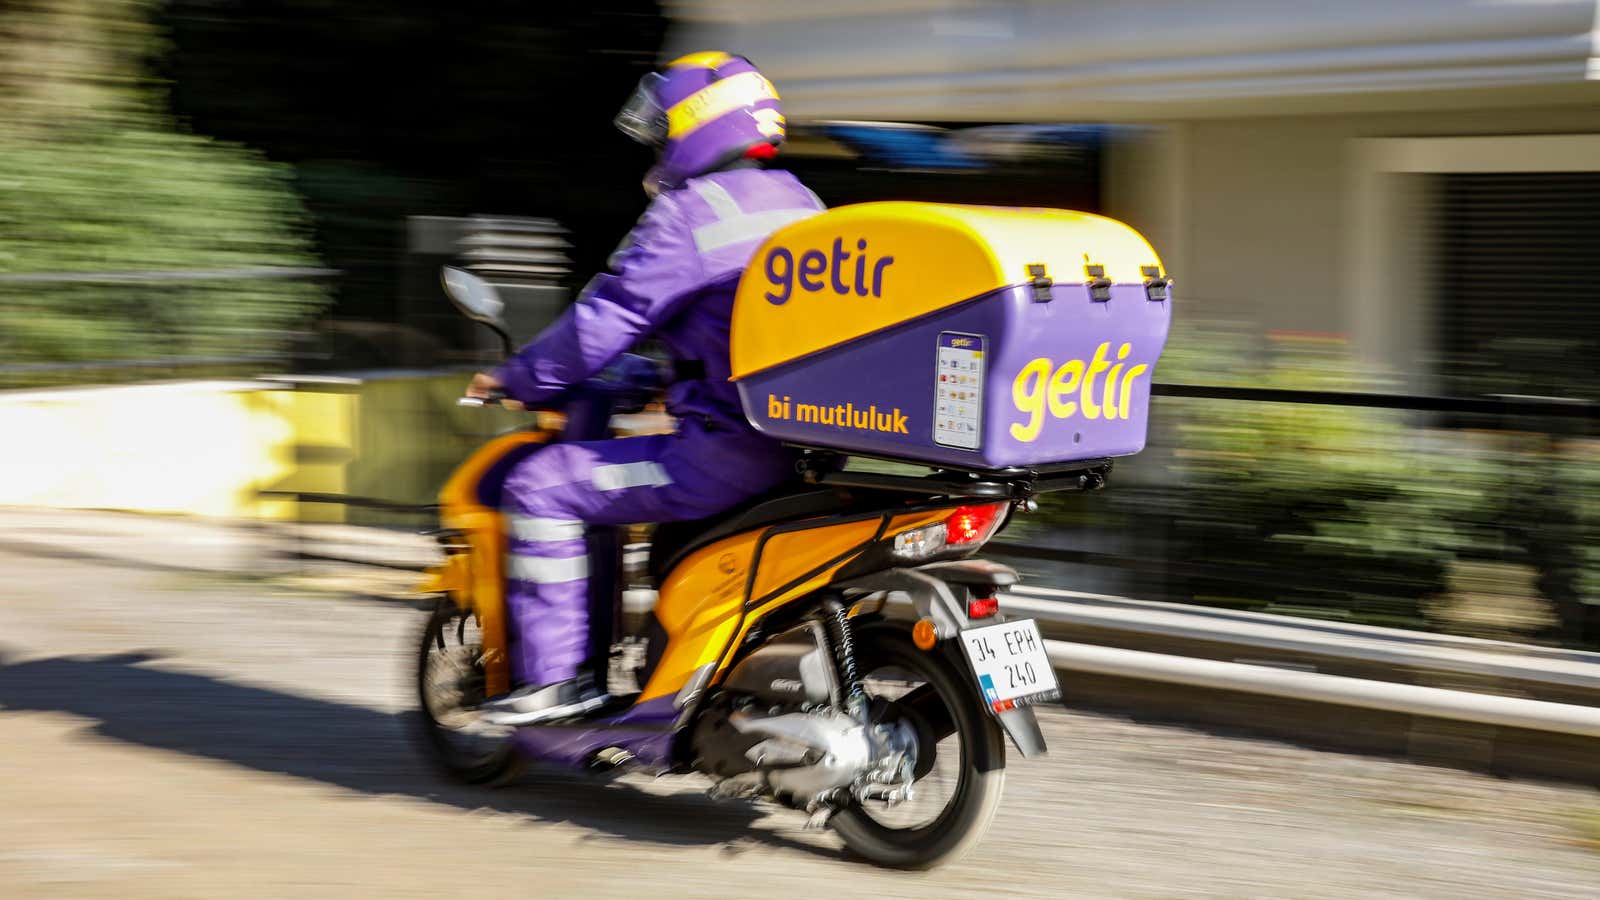 A Getir employee races to make a delivery on a heavily Getir-branded e-bike.